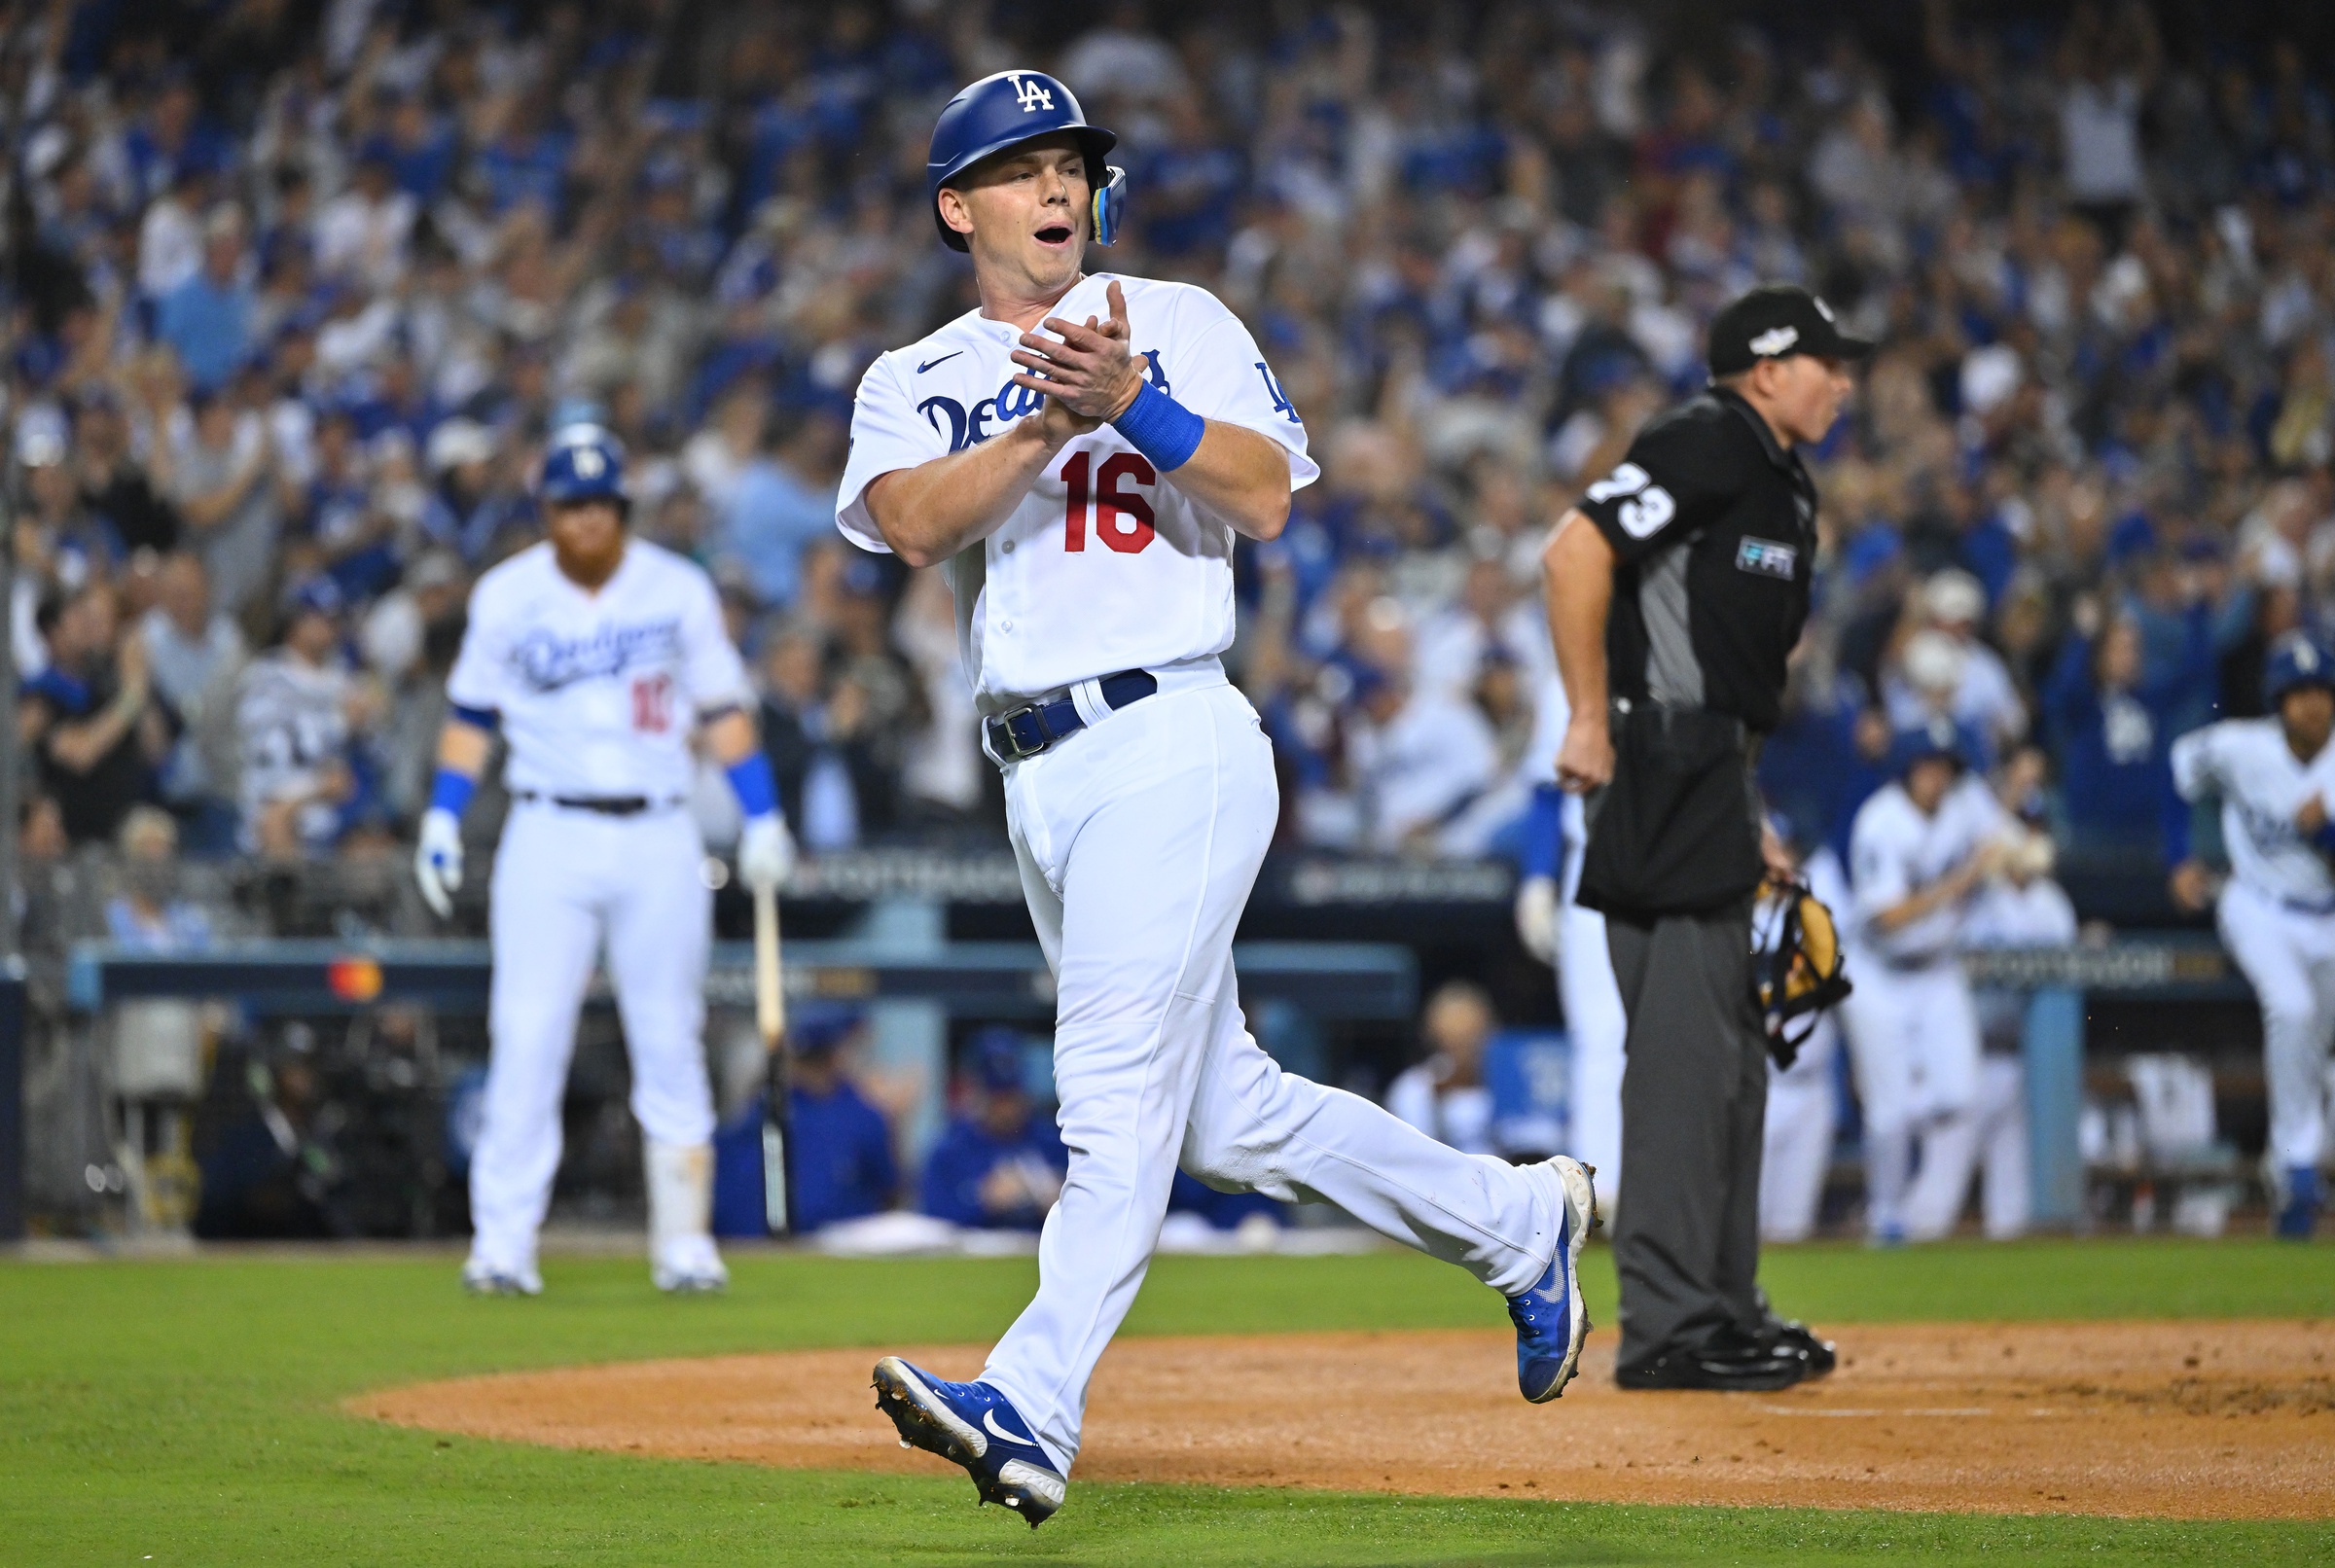 Dodgers: Will Smith Highlights, Grades and More, 2022 Year in Review